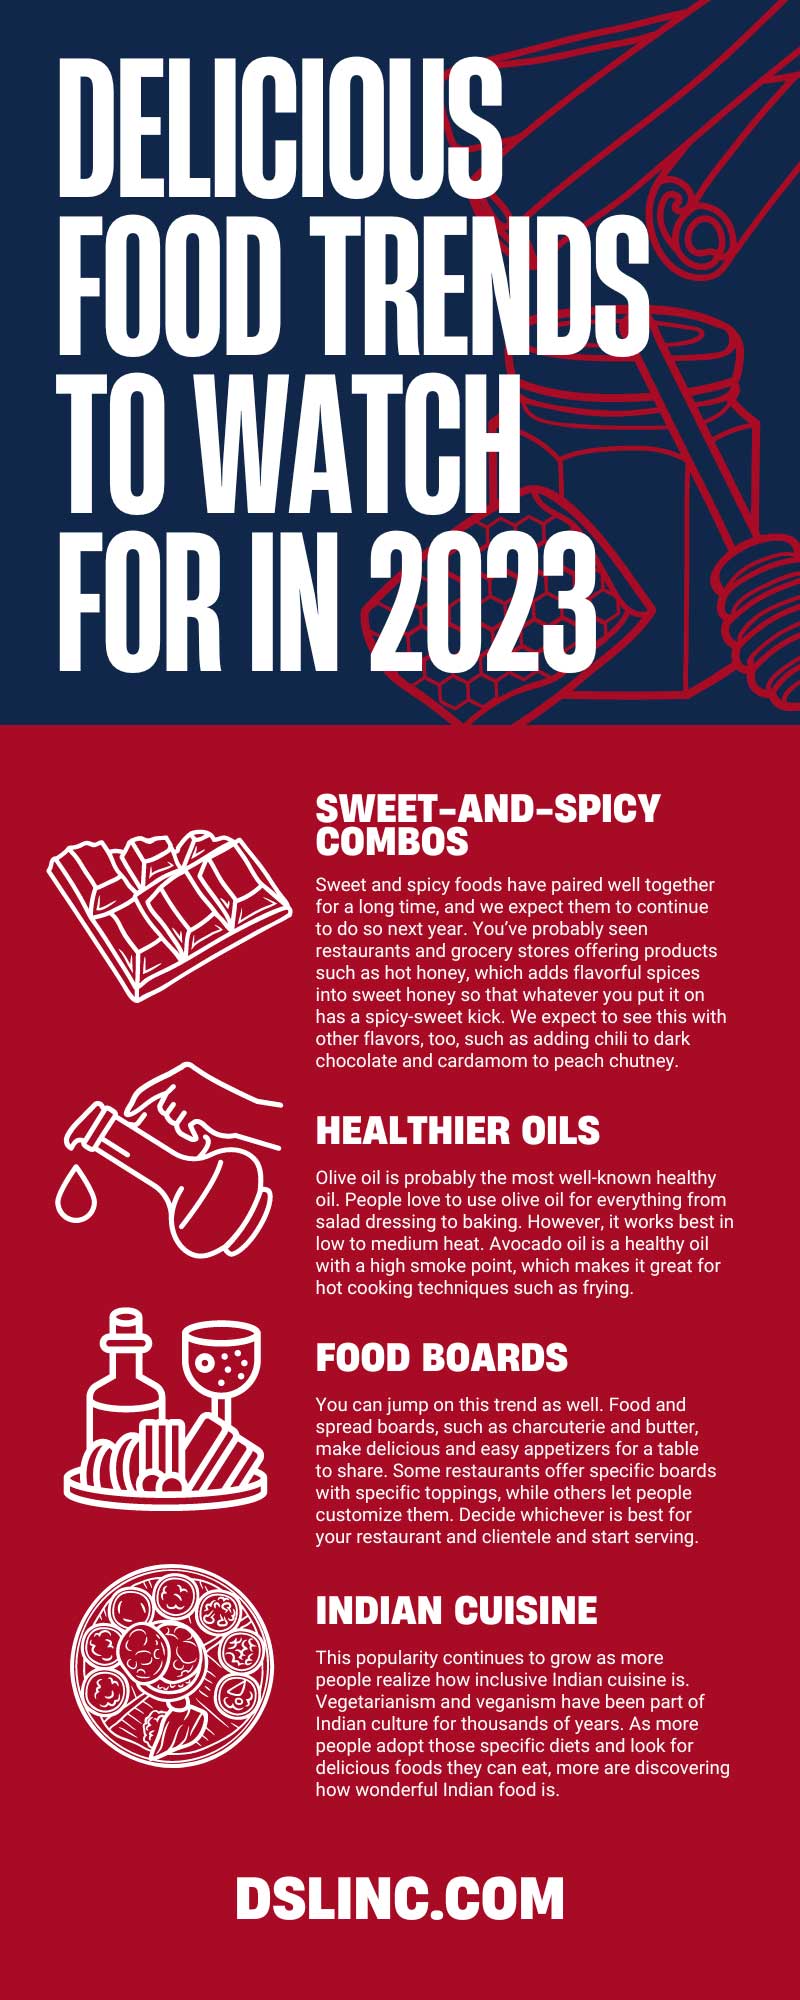 5 Delicious Food Trends To Watch for in 2023